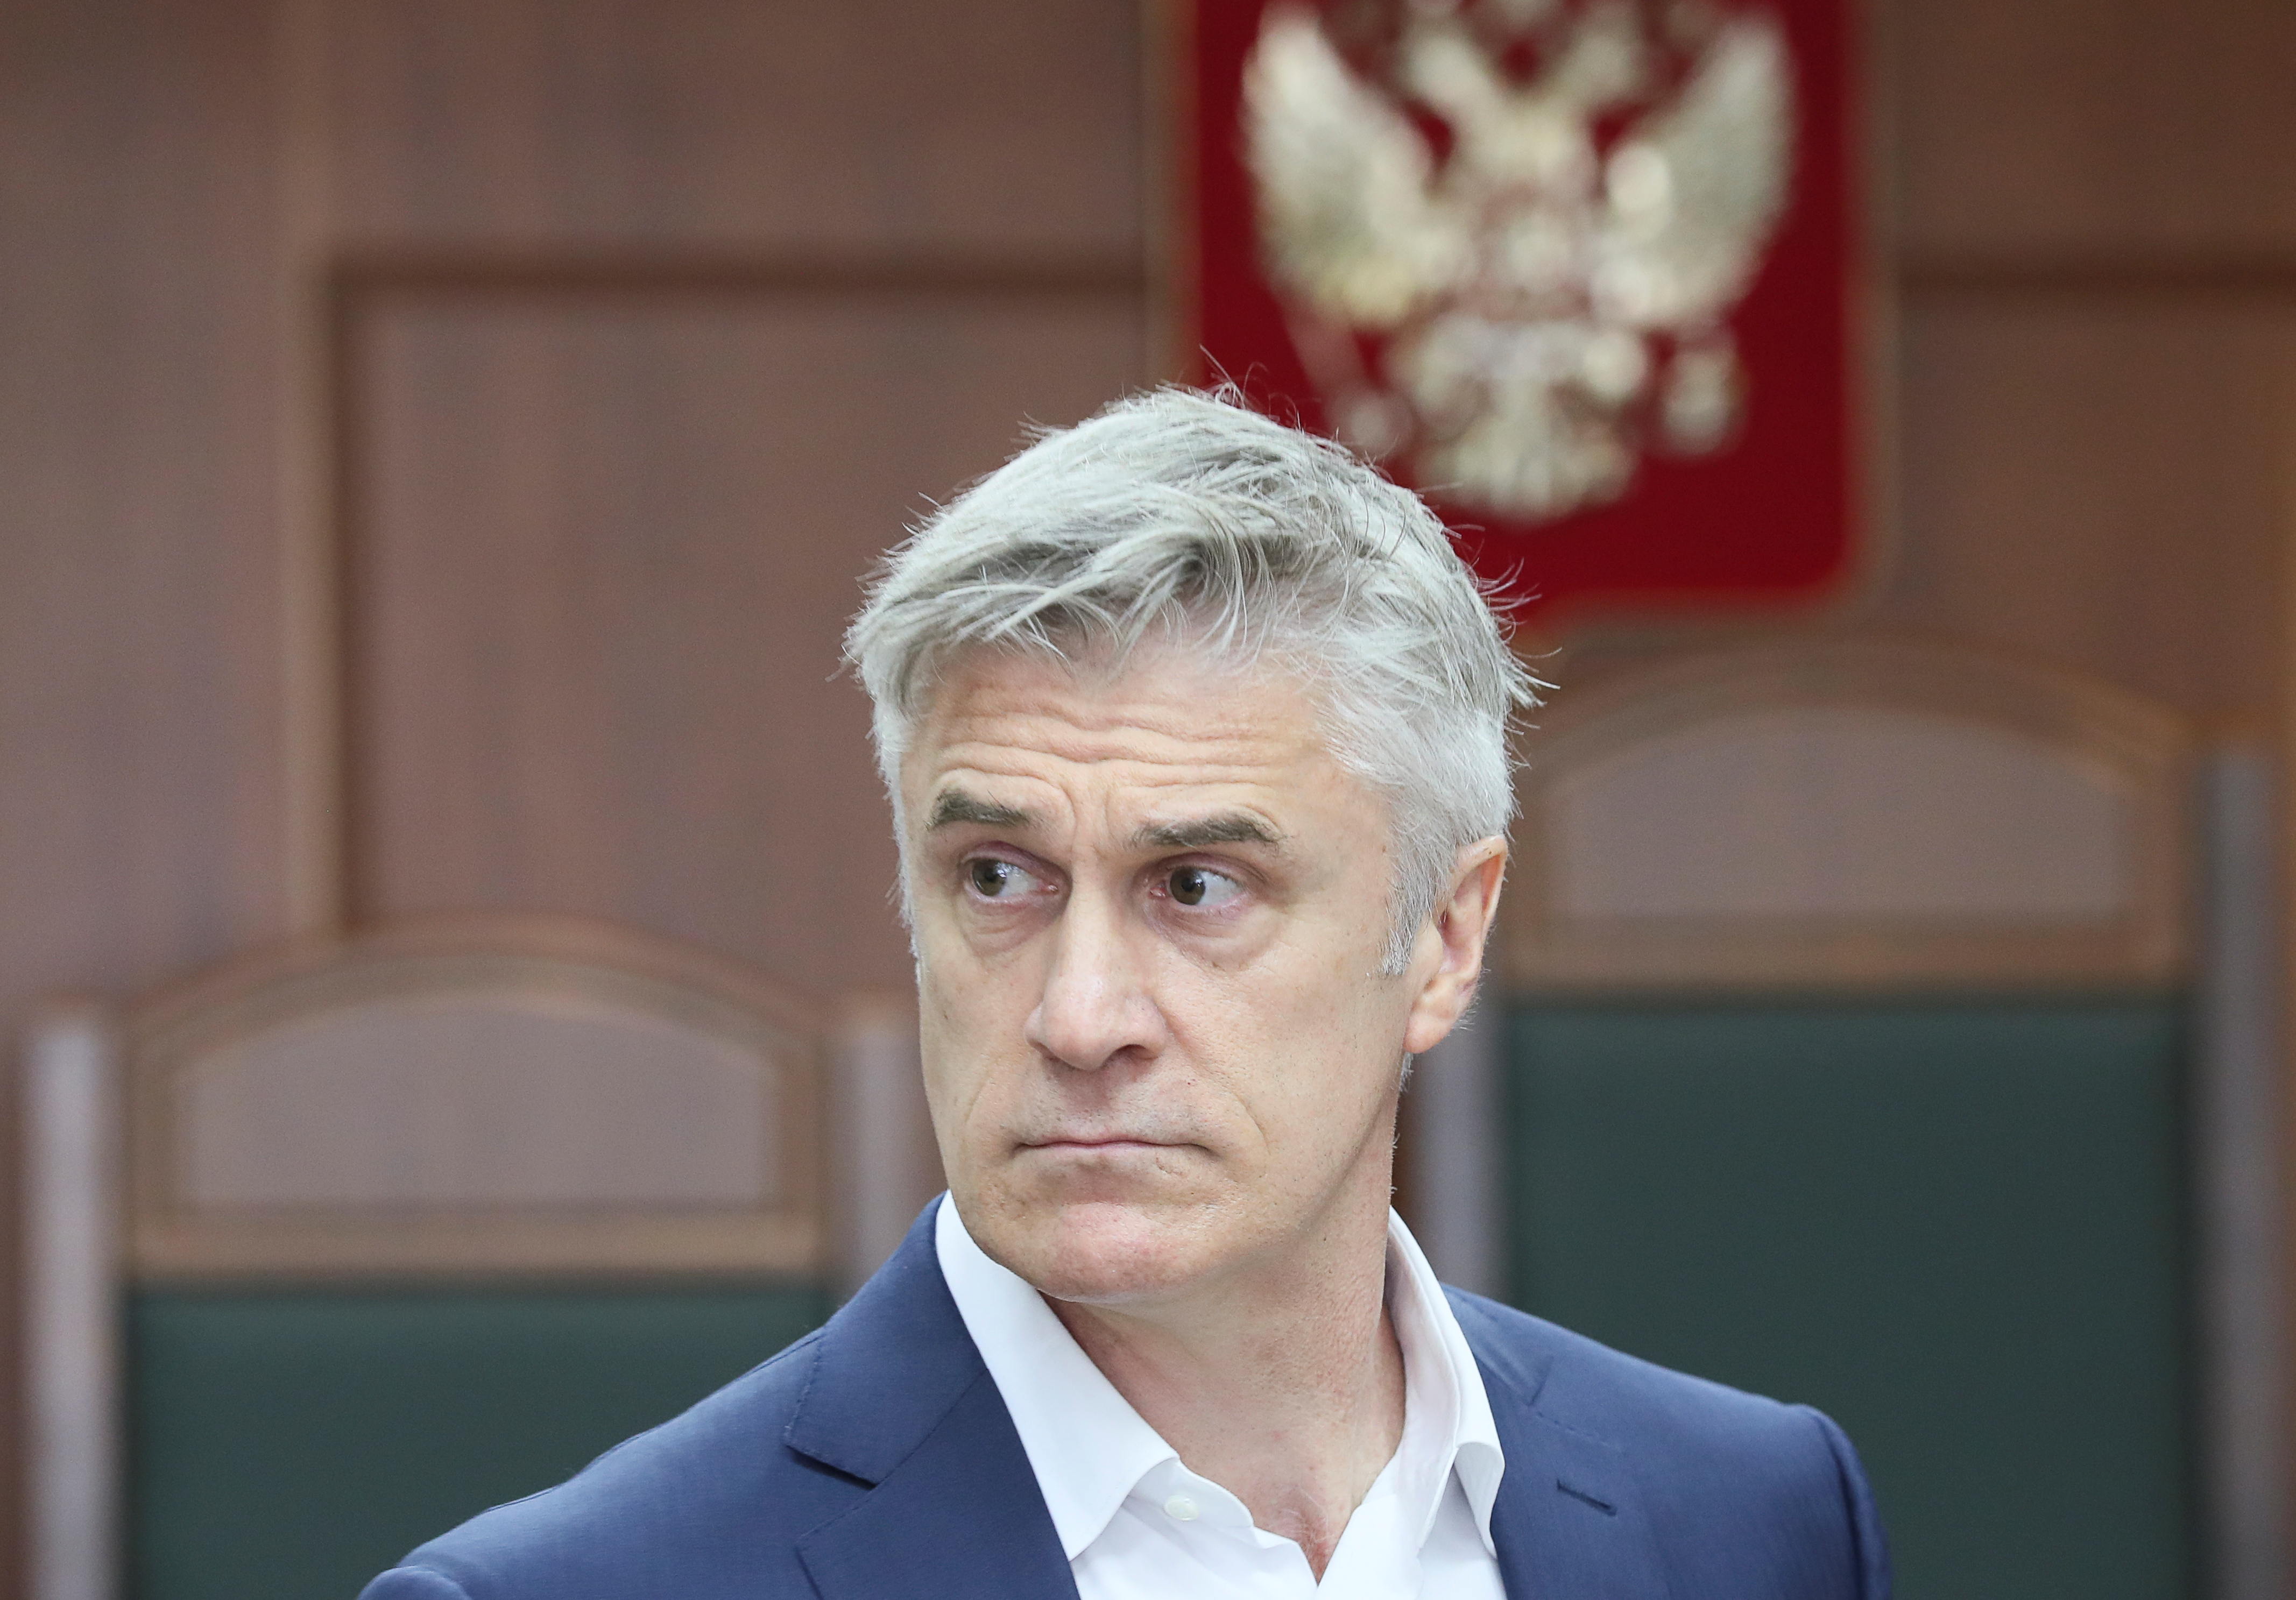 Founder of the Baring Vostok private equity group Calvey attends a court hearing in Moscow